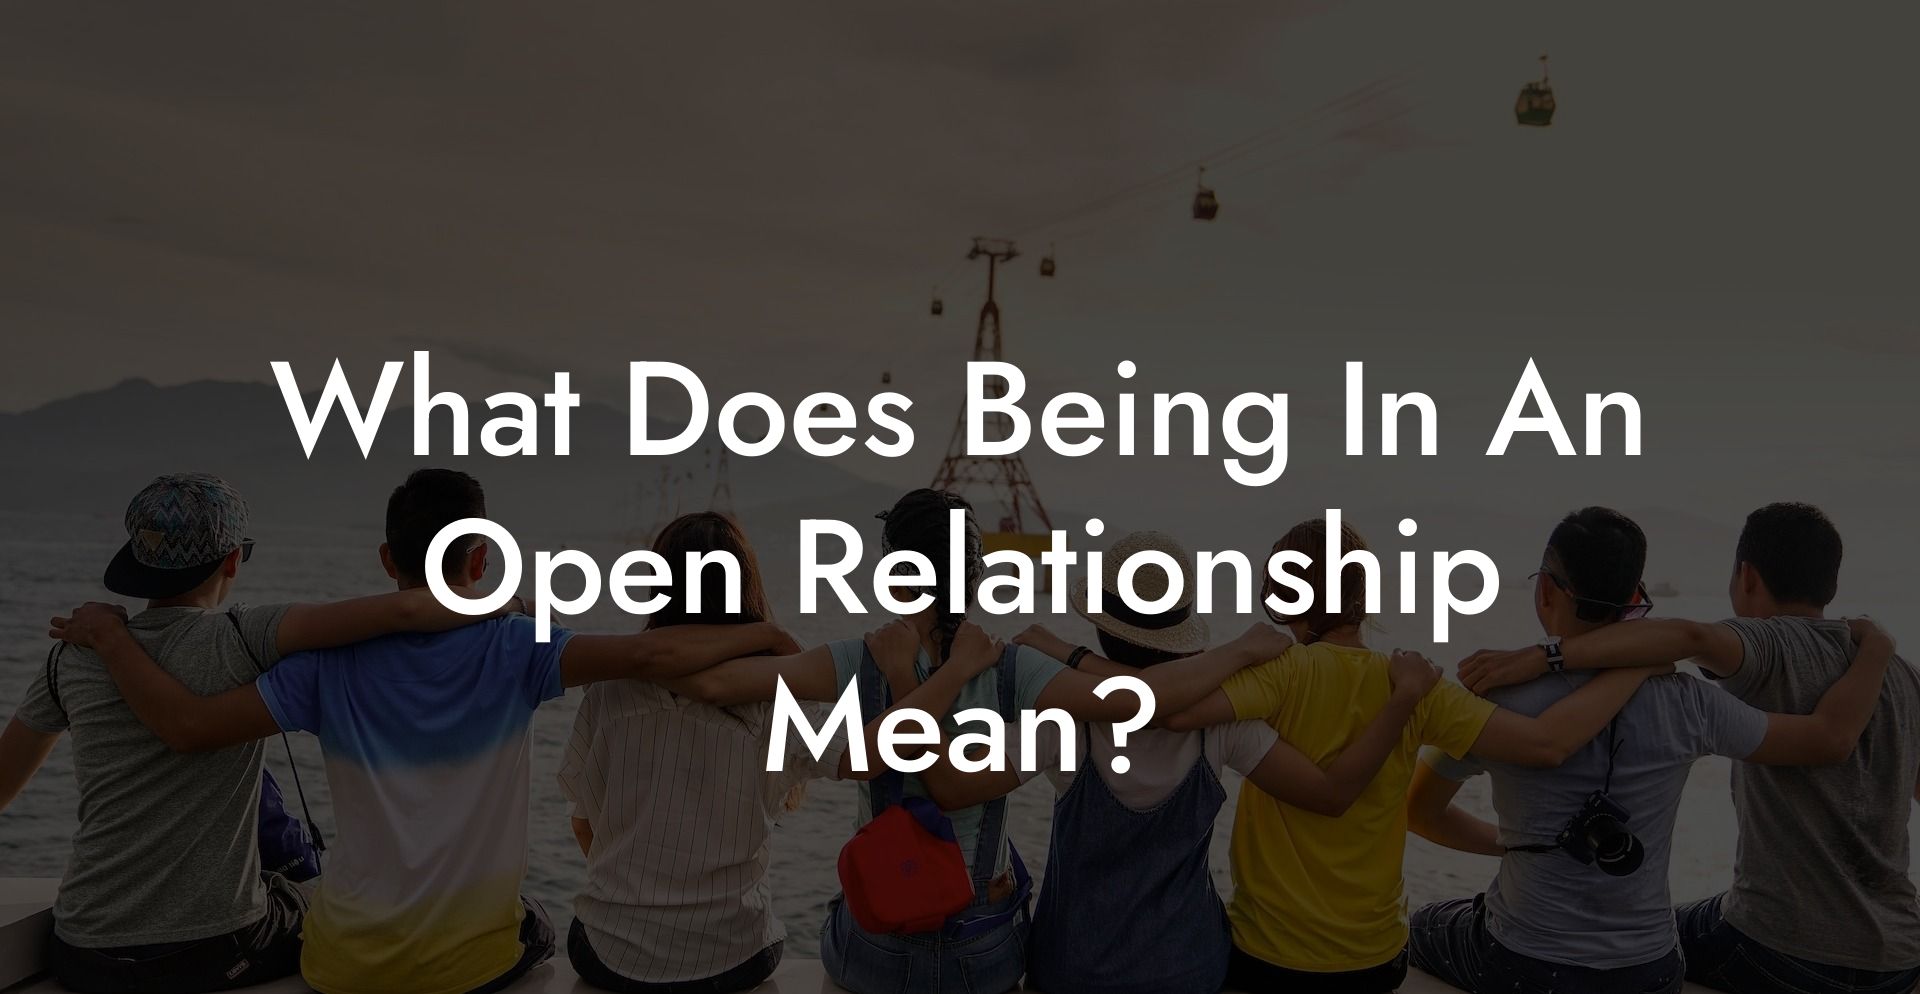 What Does Being In An Open Relationship Mean?